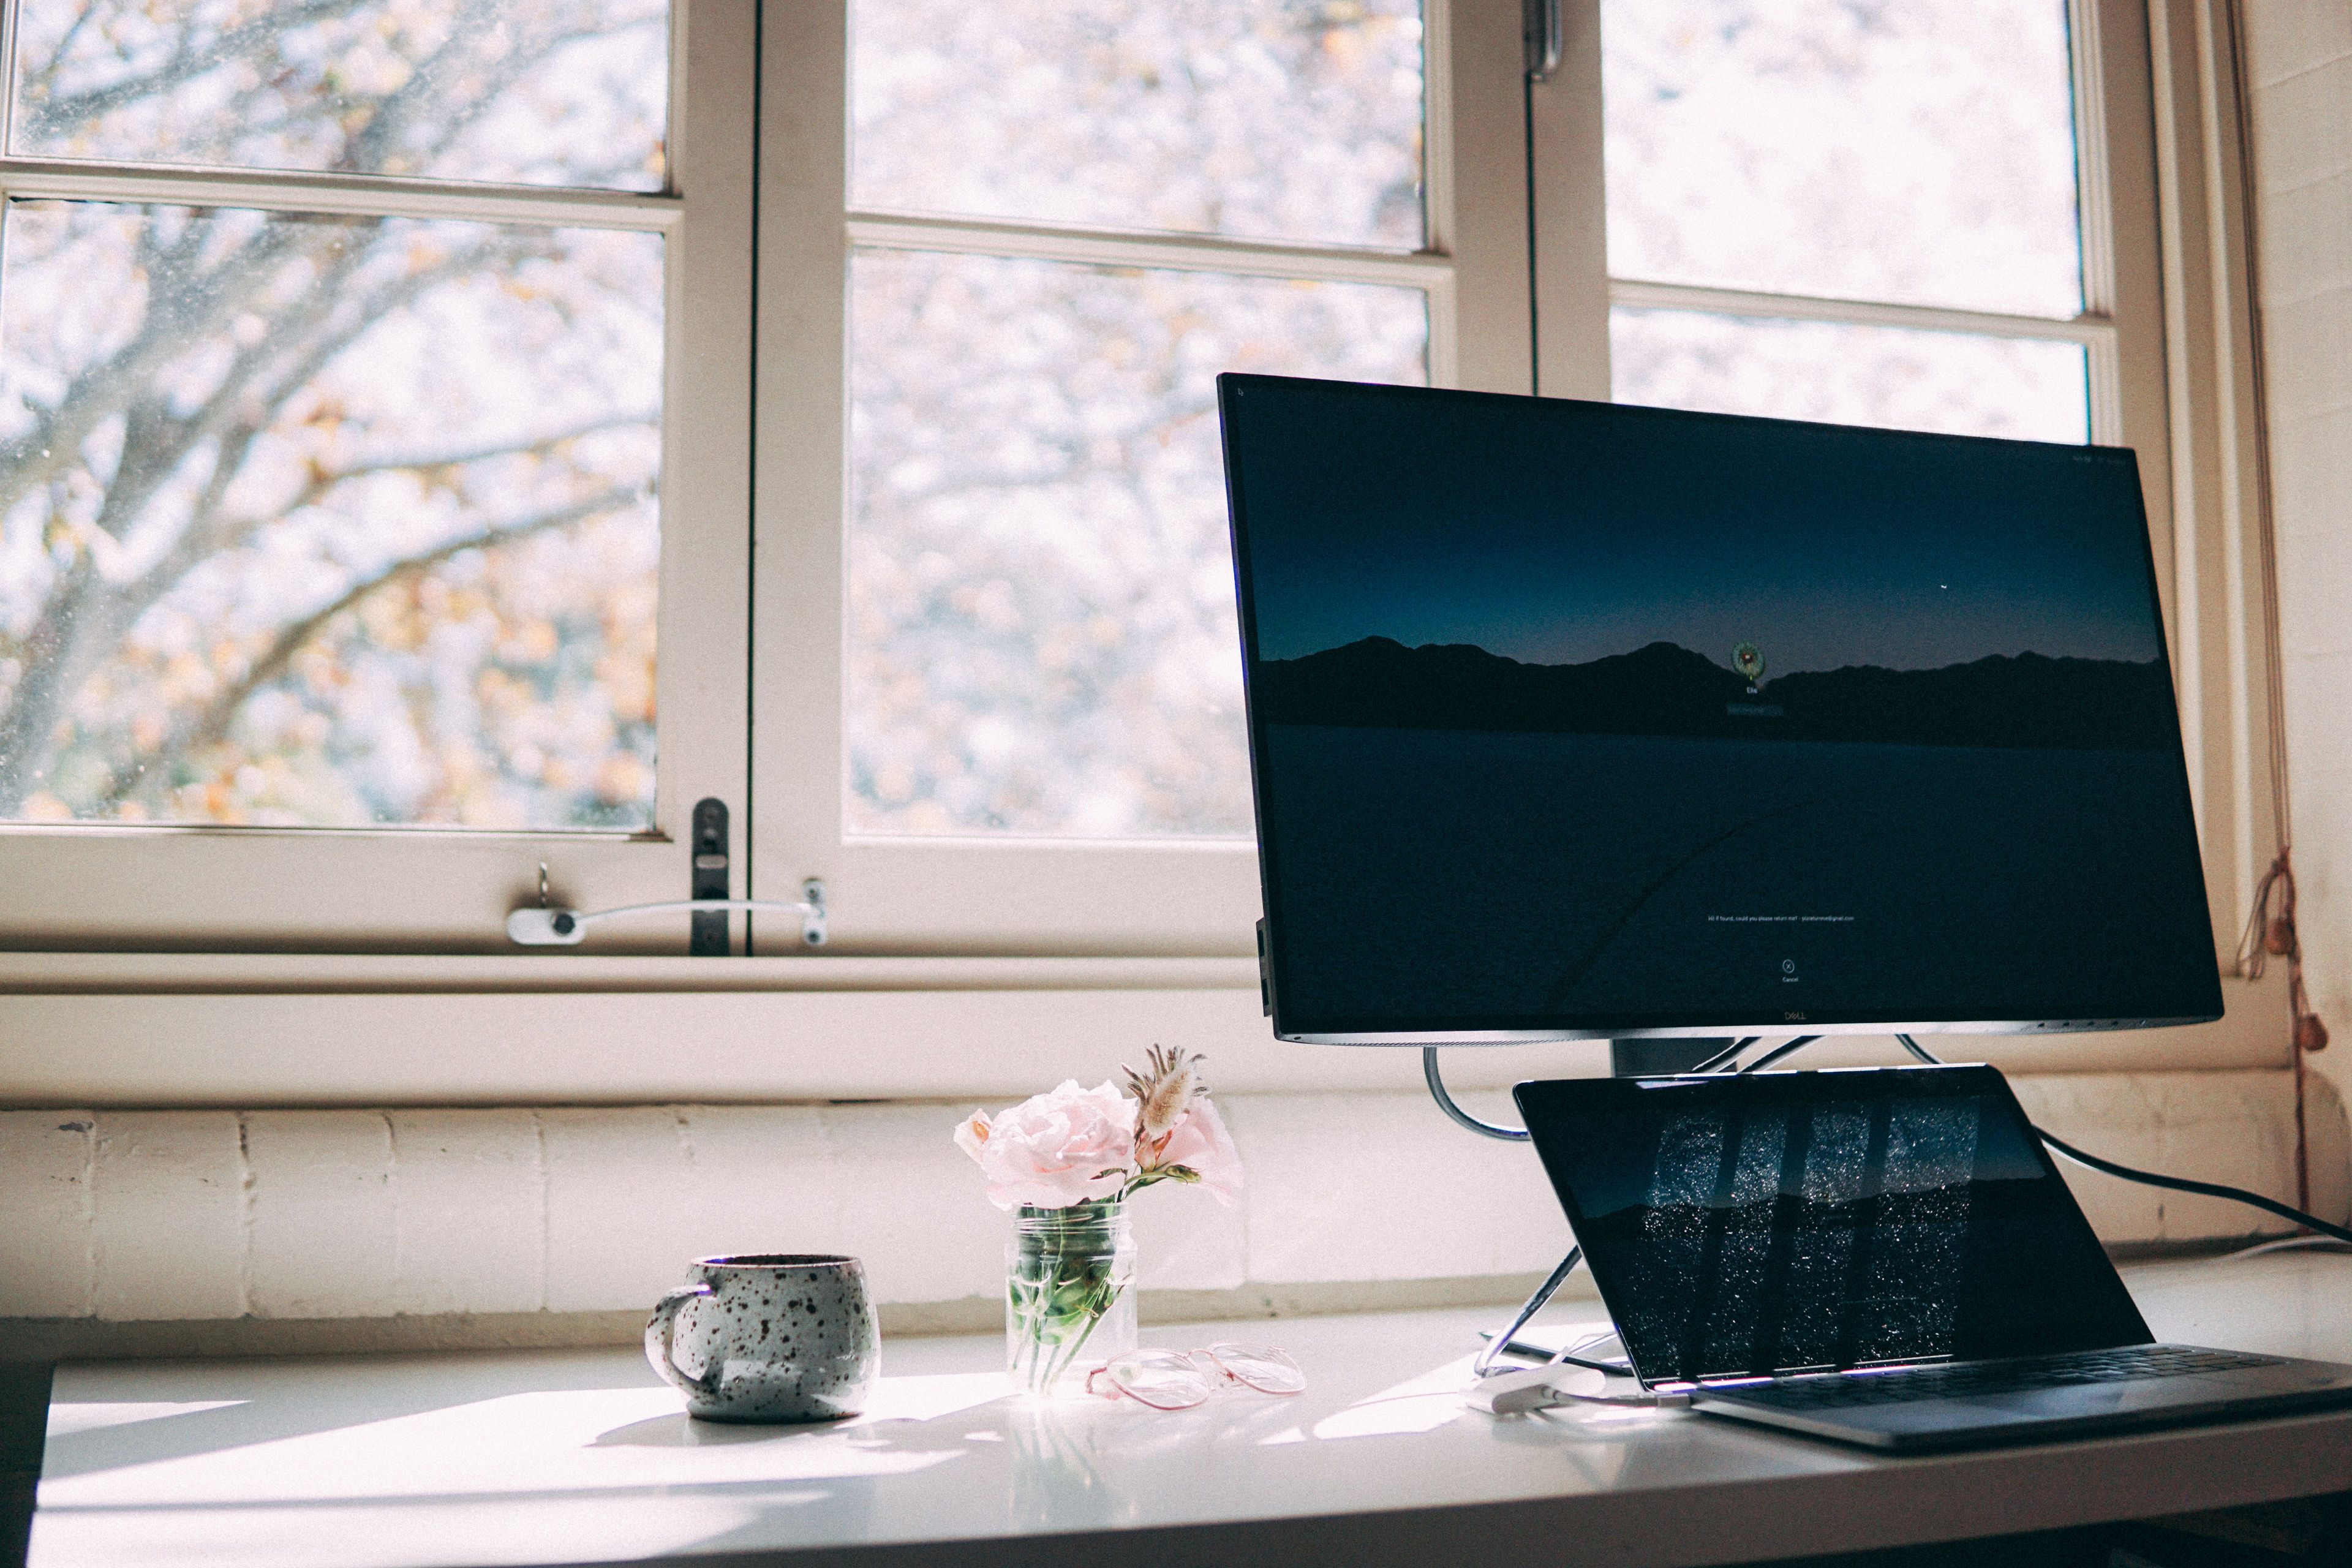 Work From Home: 5 Ergonomic Home Office Essentials – Healthy Hong Kong (HKG)